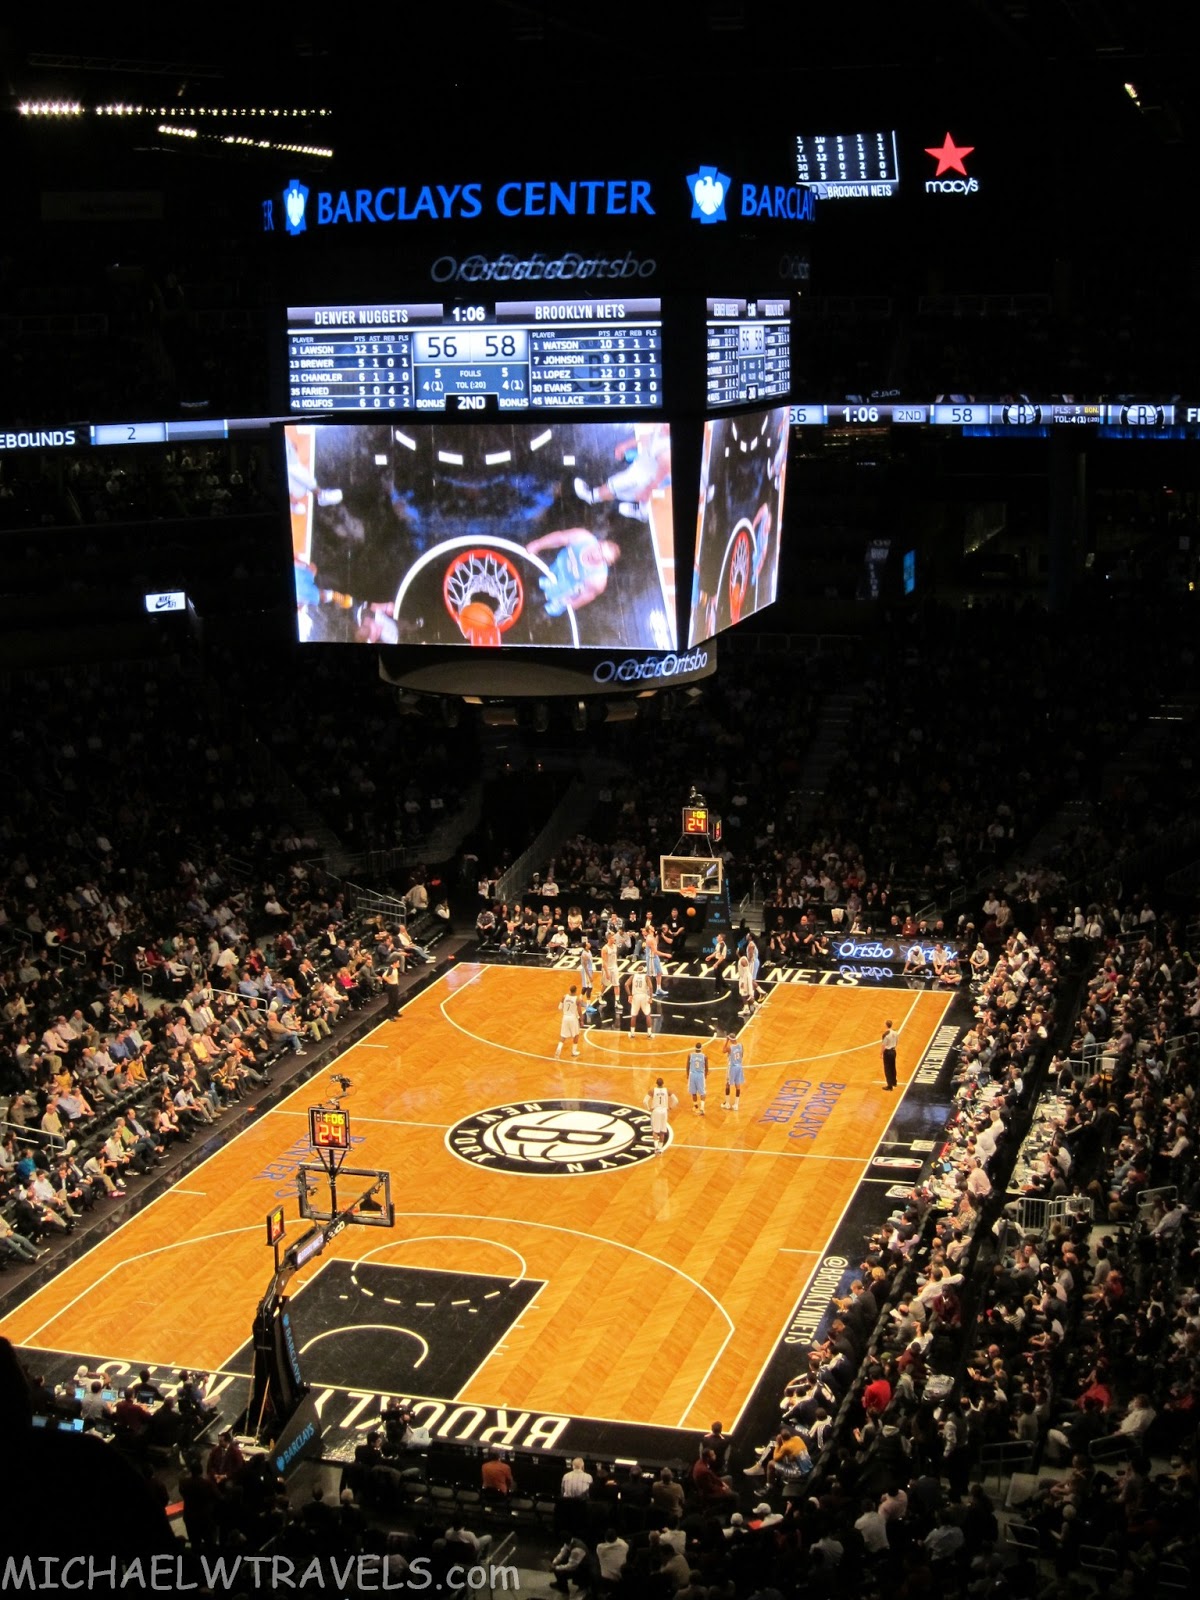 Barclays Center: A visitor guide for your Brooklyn Nets or NY